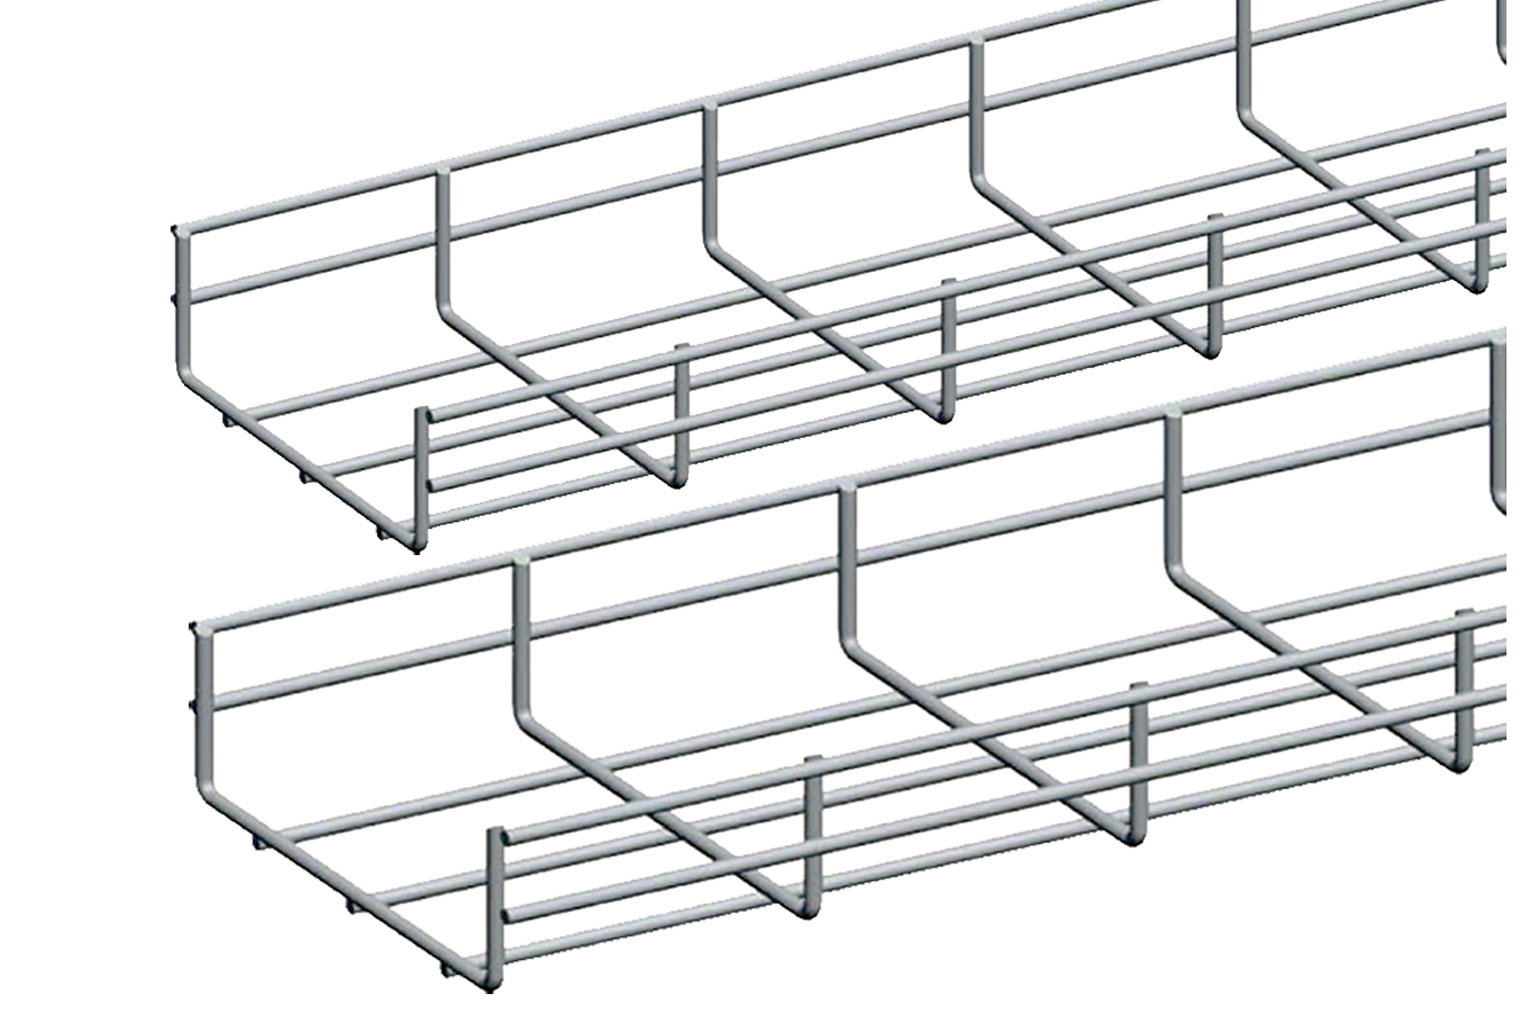 GlobalTrac Wire Mesh Cable Tray - Image 1